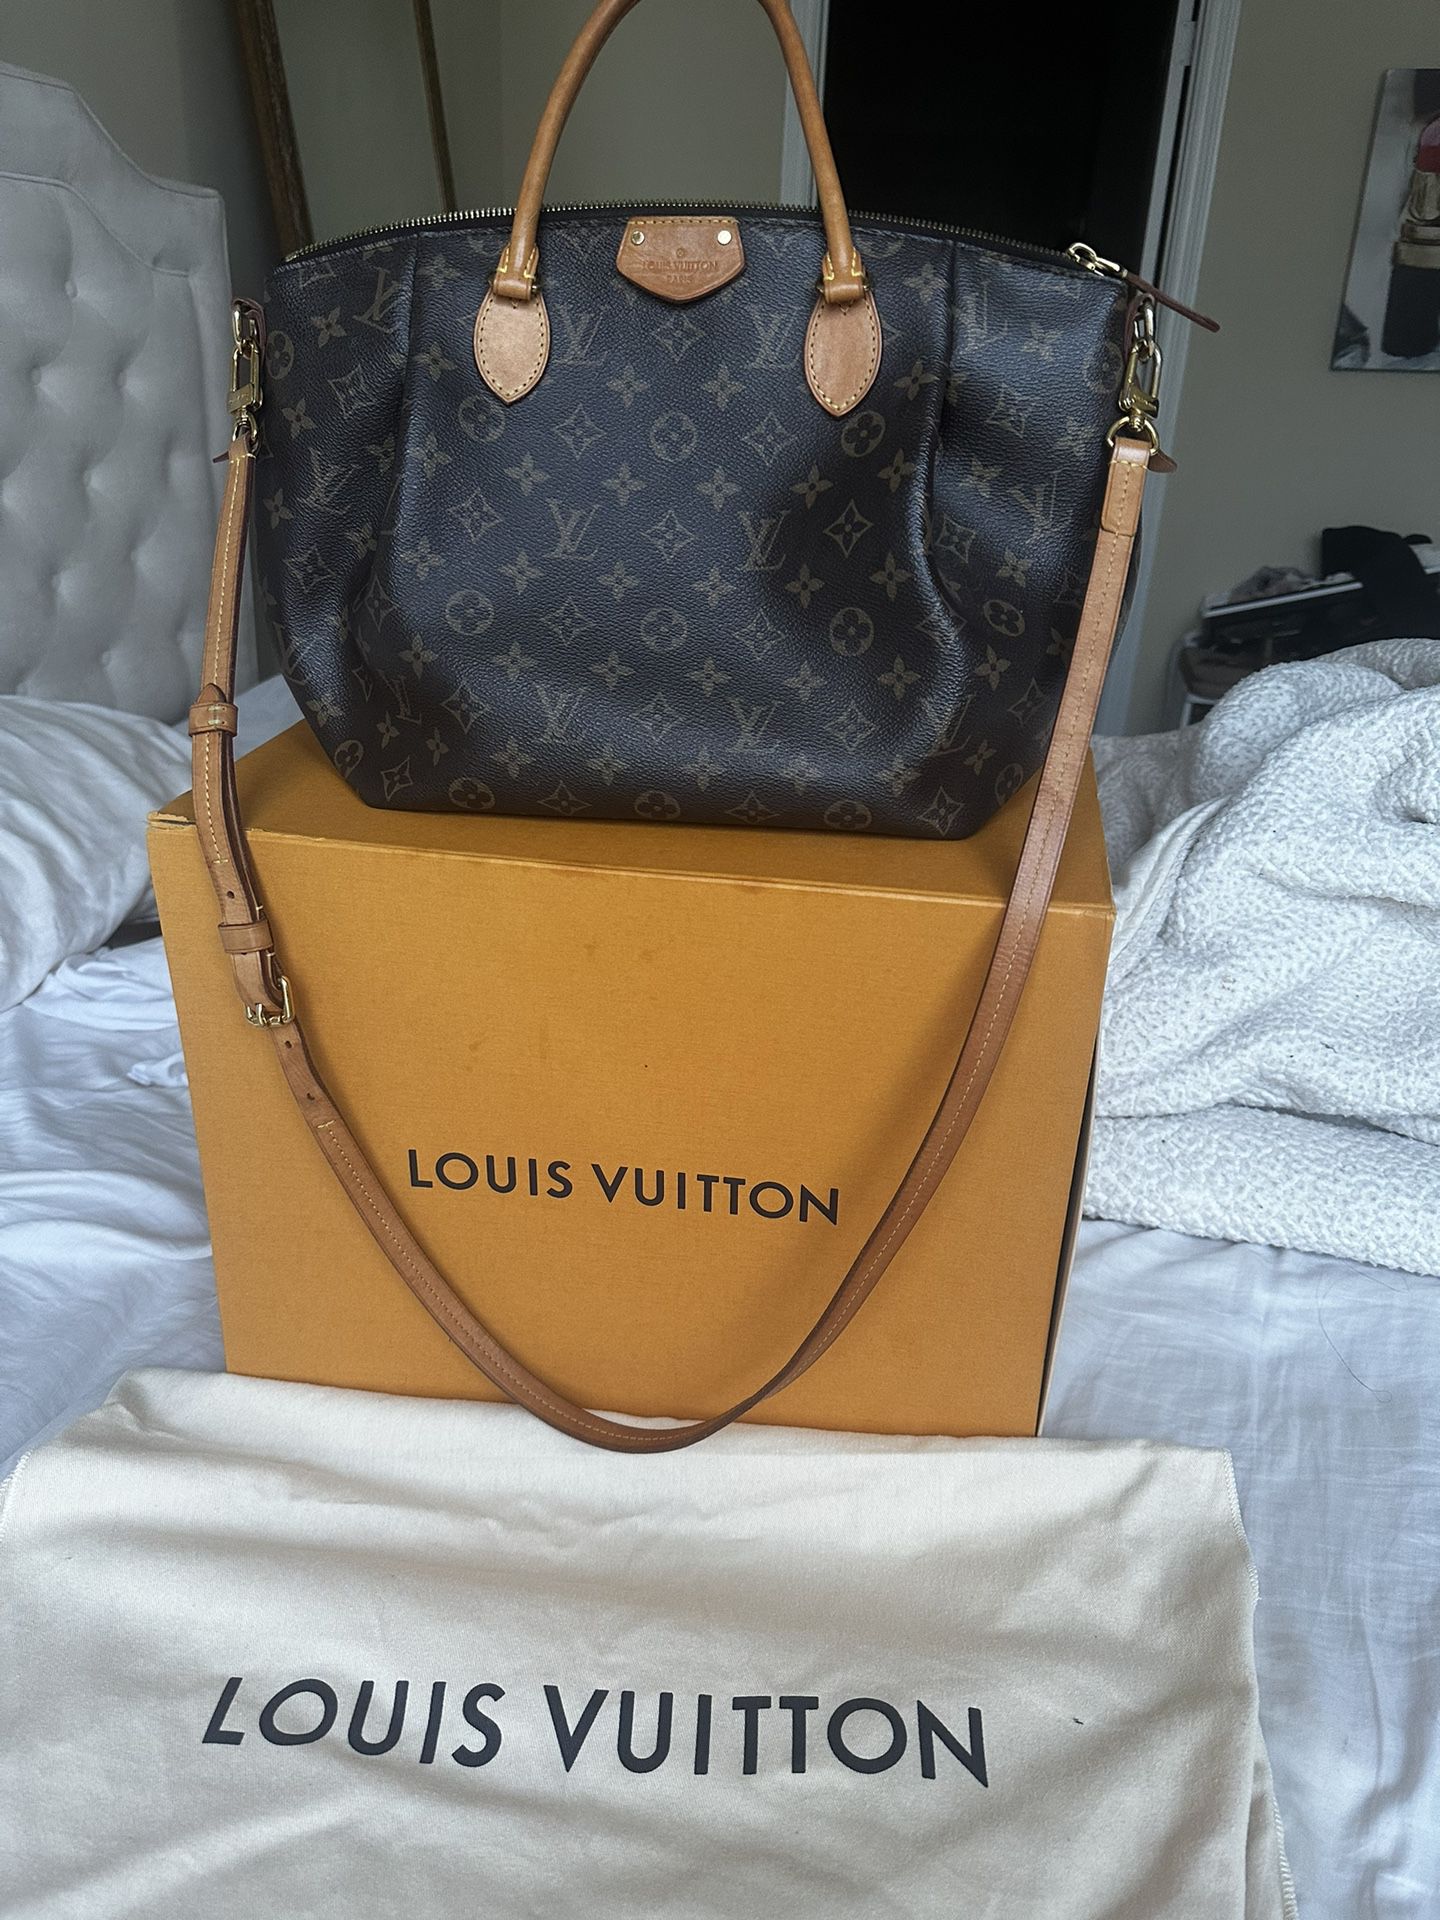 Louis Vuitton Turenne second hand prices